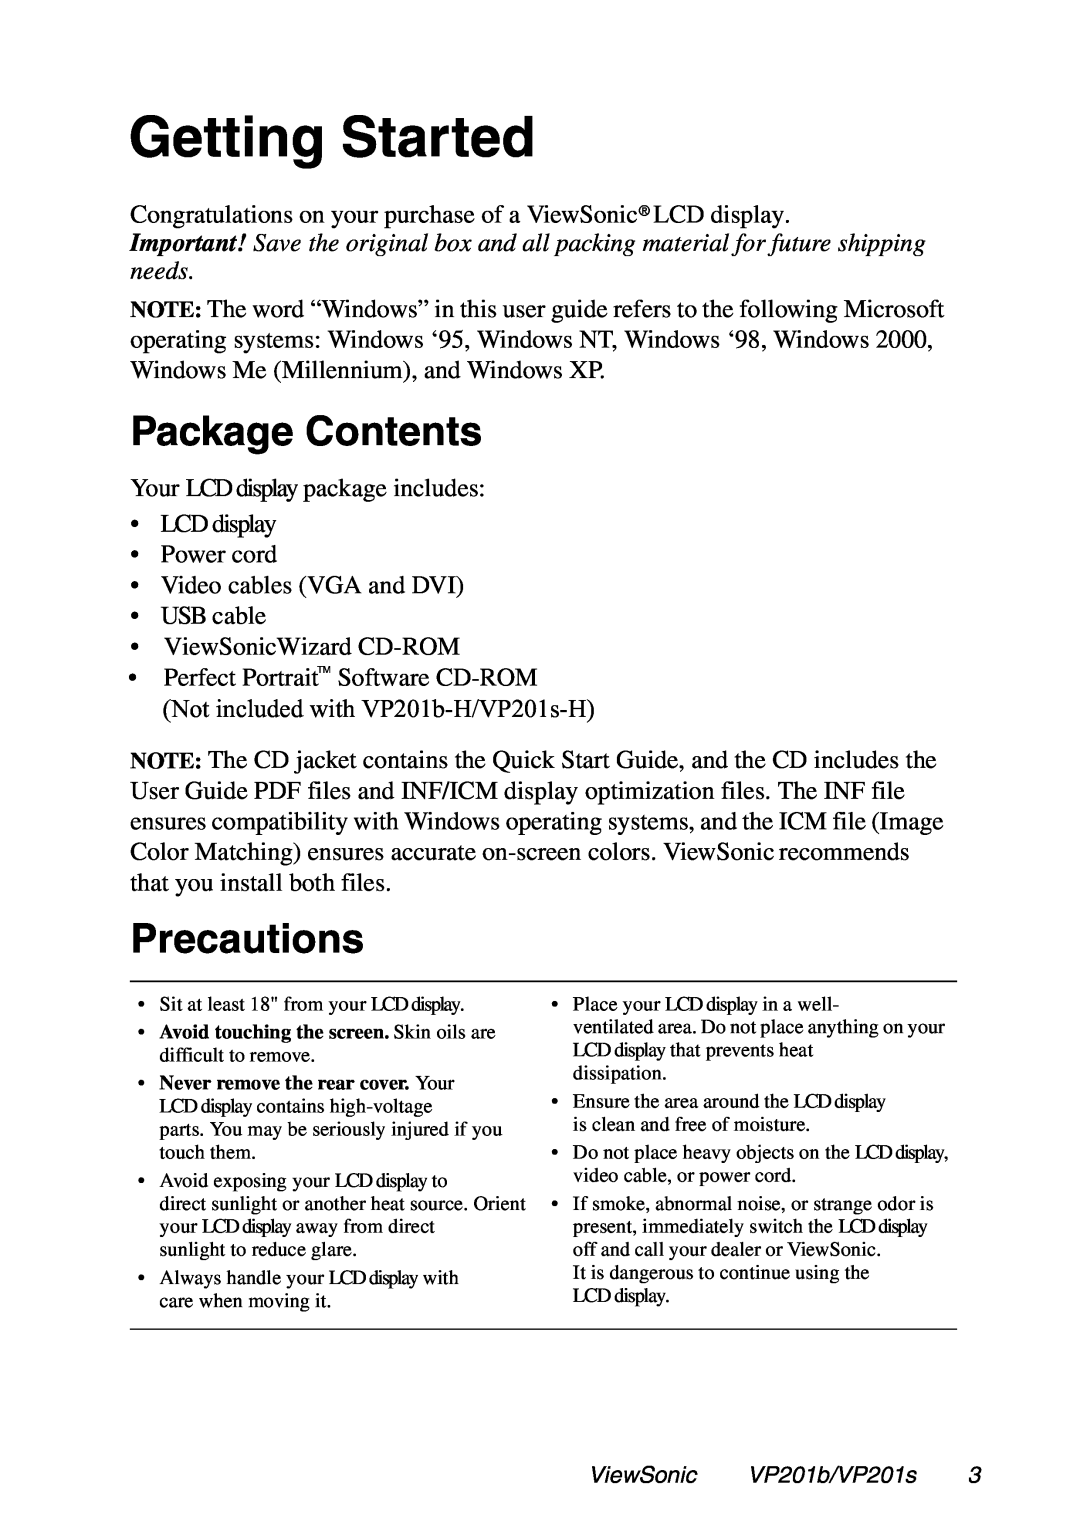 ViewSonic VP201b, VP201s manual Getting Started, Package Contents, Precautions 